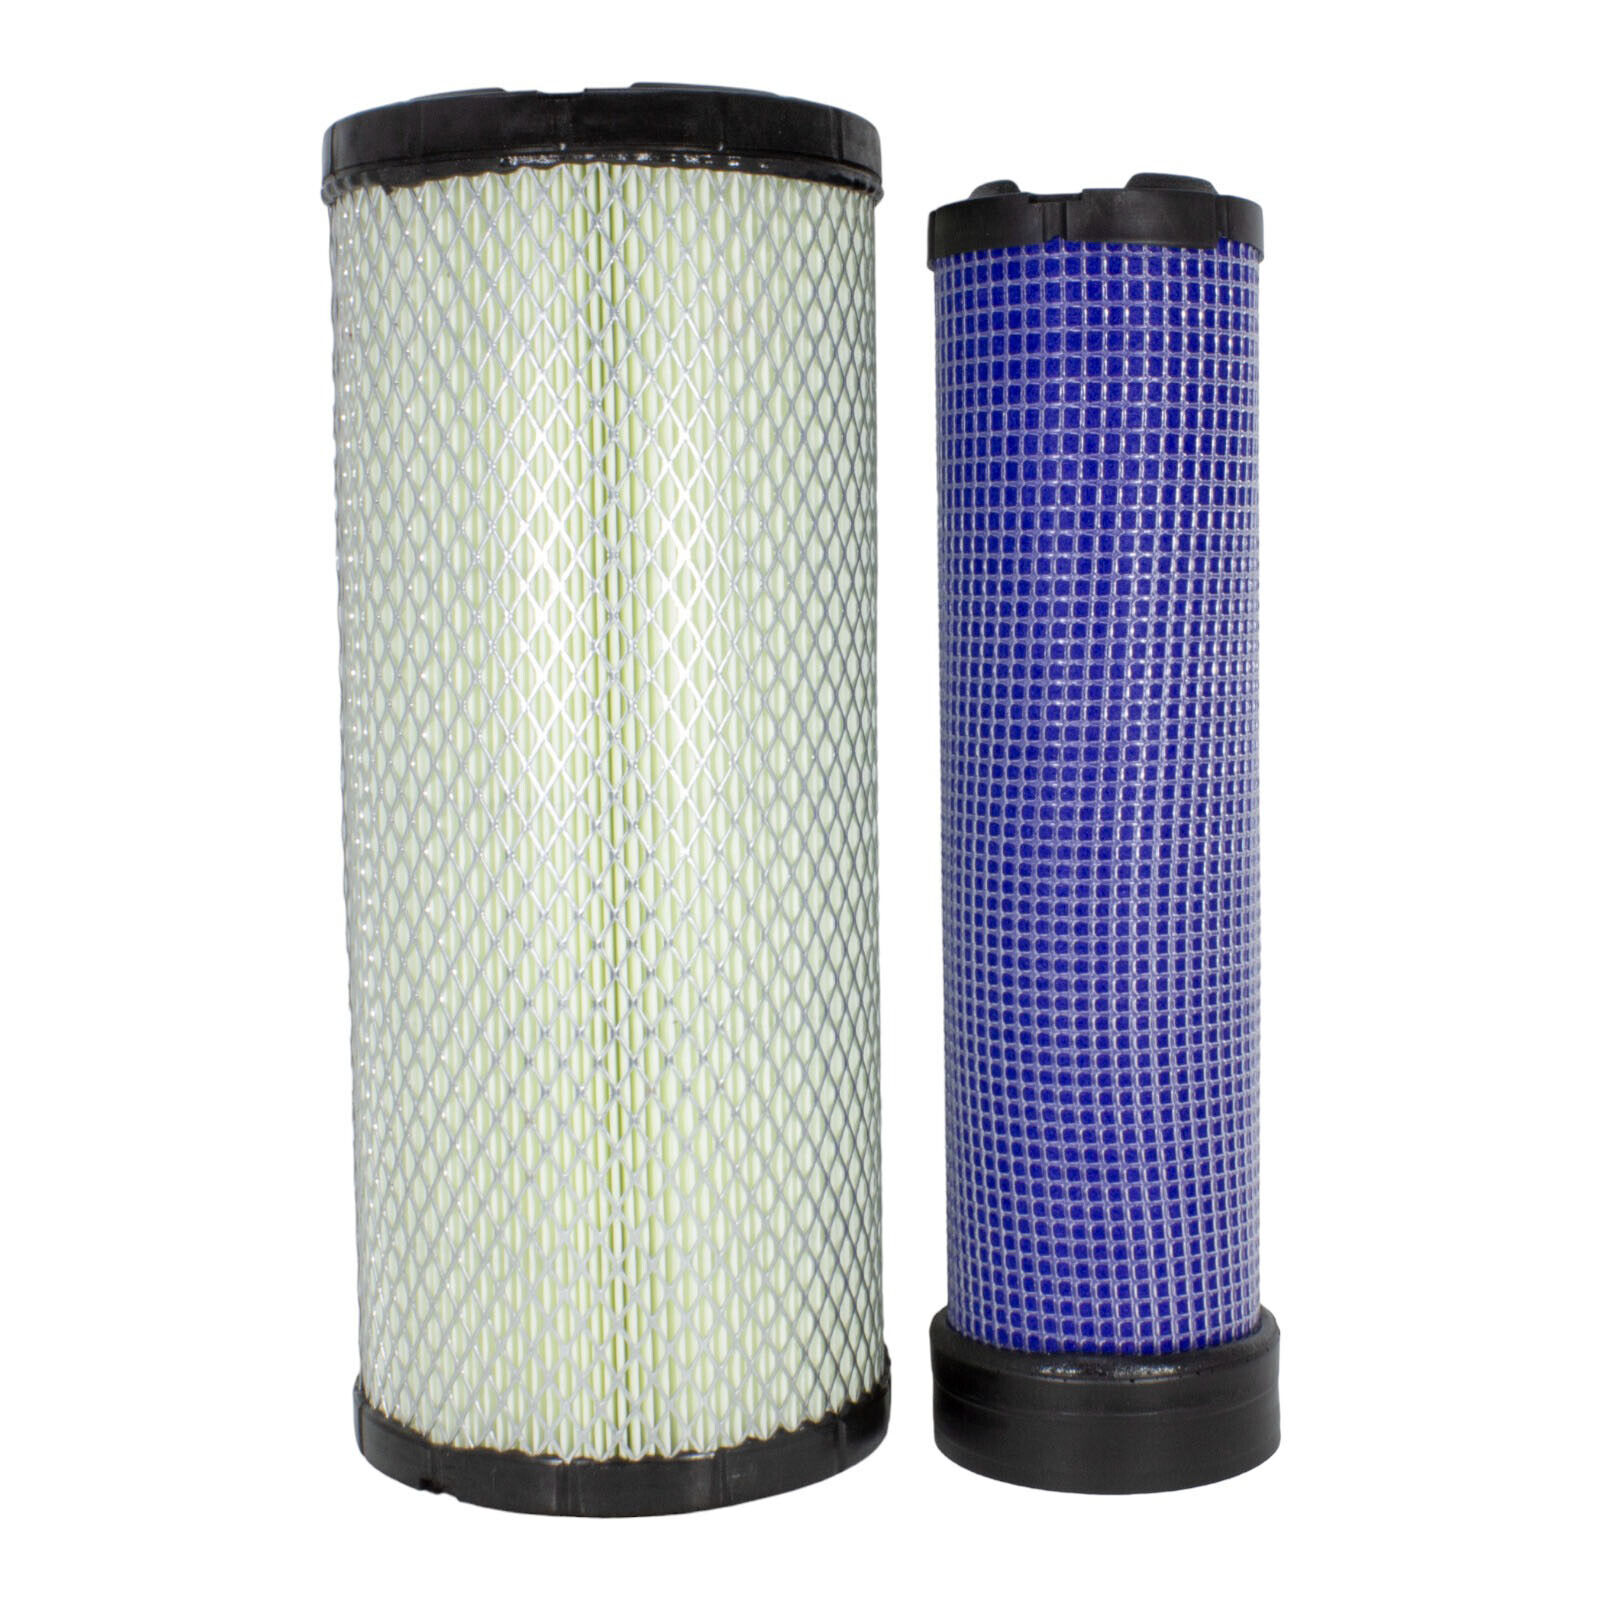 6666375 6666376 Air Filter Bobcat Compatible 863 864 873 883 S450 S530 S570 S590